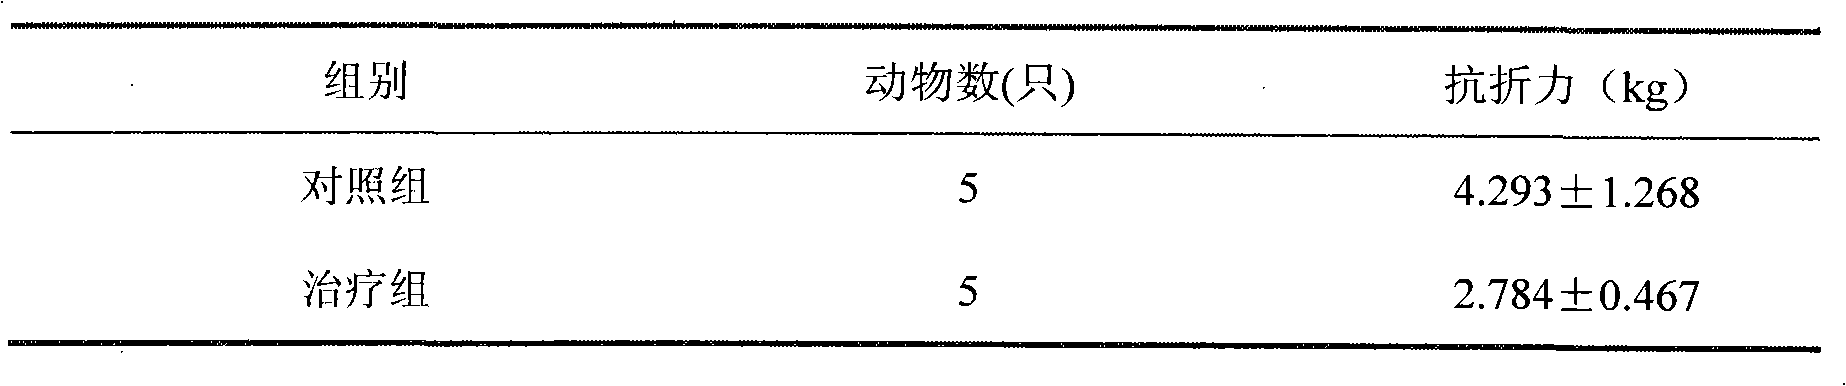 Chinese traditional medicine for promoting fracture healing and preparation method thereof